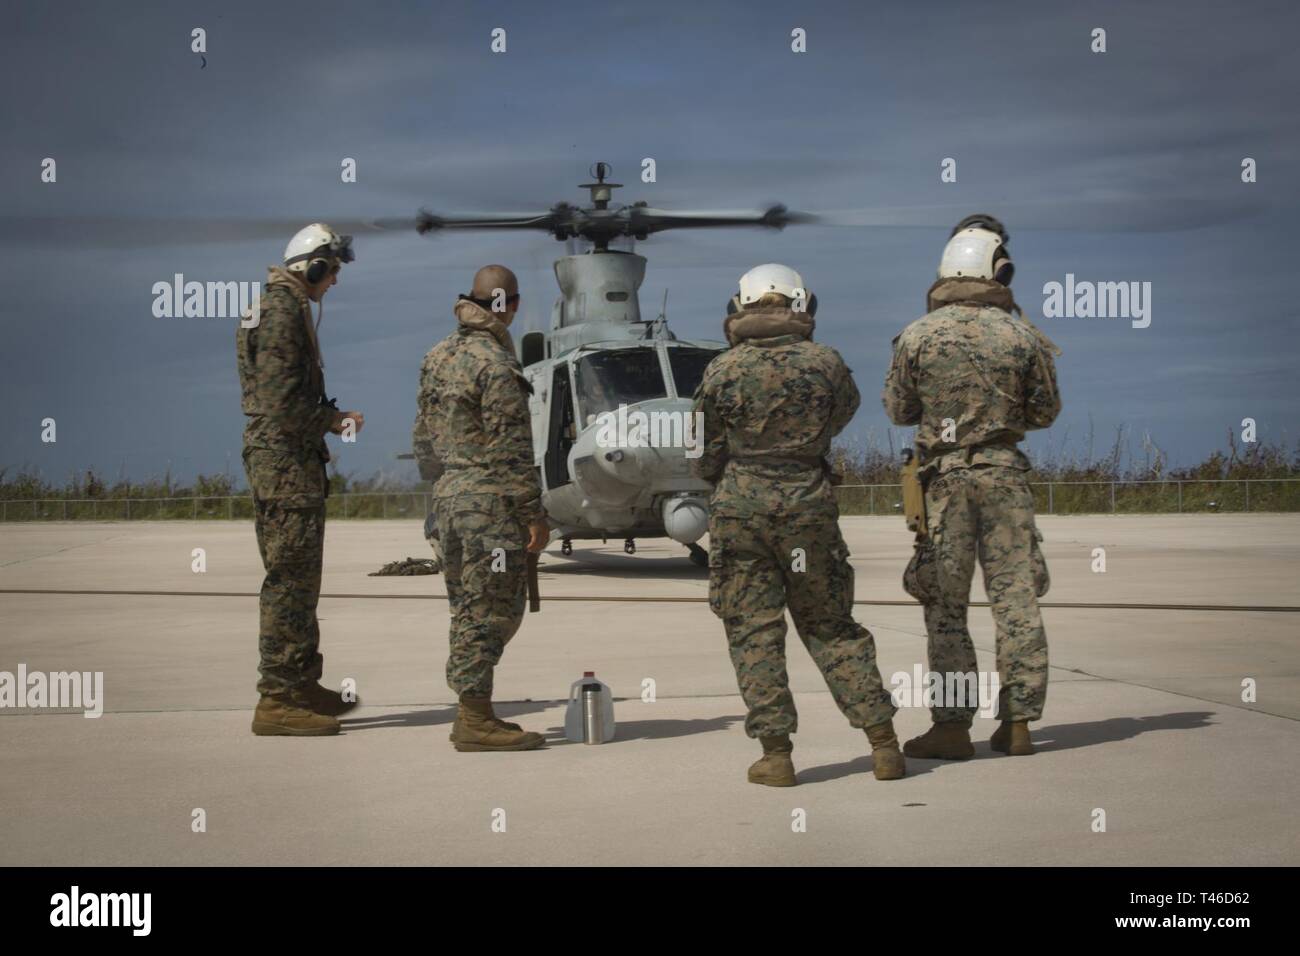 Marines with Combat Logistics Battalion 31 and Alpha Company, Battalion Landing Team, 1st Battalion, 4th Marines, prepare to board a UH-1Y Huey helicopter at Anderson Air Force Base, Guam, before a visit to Tinian, Commonwealth of the Northern Mariana Islands, March 11, 2019. Marines and Sailors with CLB-31 led a multi-service task force, partnering with the Federal Emergency Management Agency, to help the U.S. citizens of Tinian begin recovery efforts in the wake of Super Typhoon Yutu last year. The Marines and Sailors, currently participating in two weeks of unit-level training on nearby Gua Stock Photo